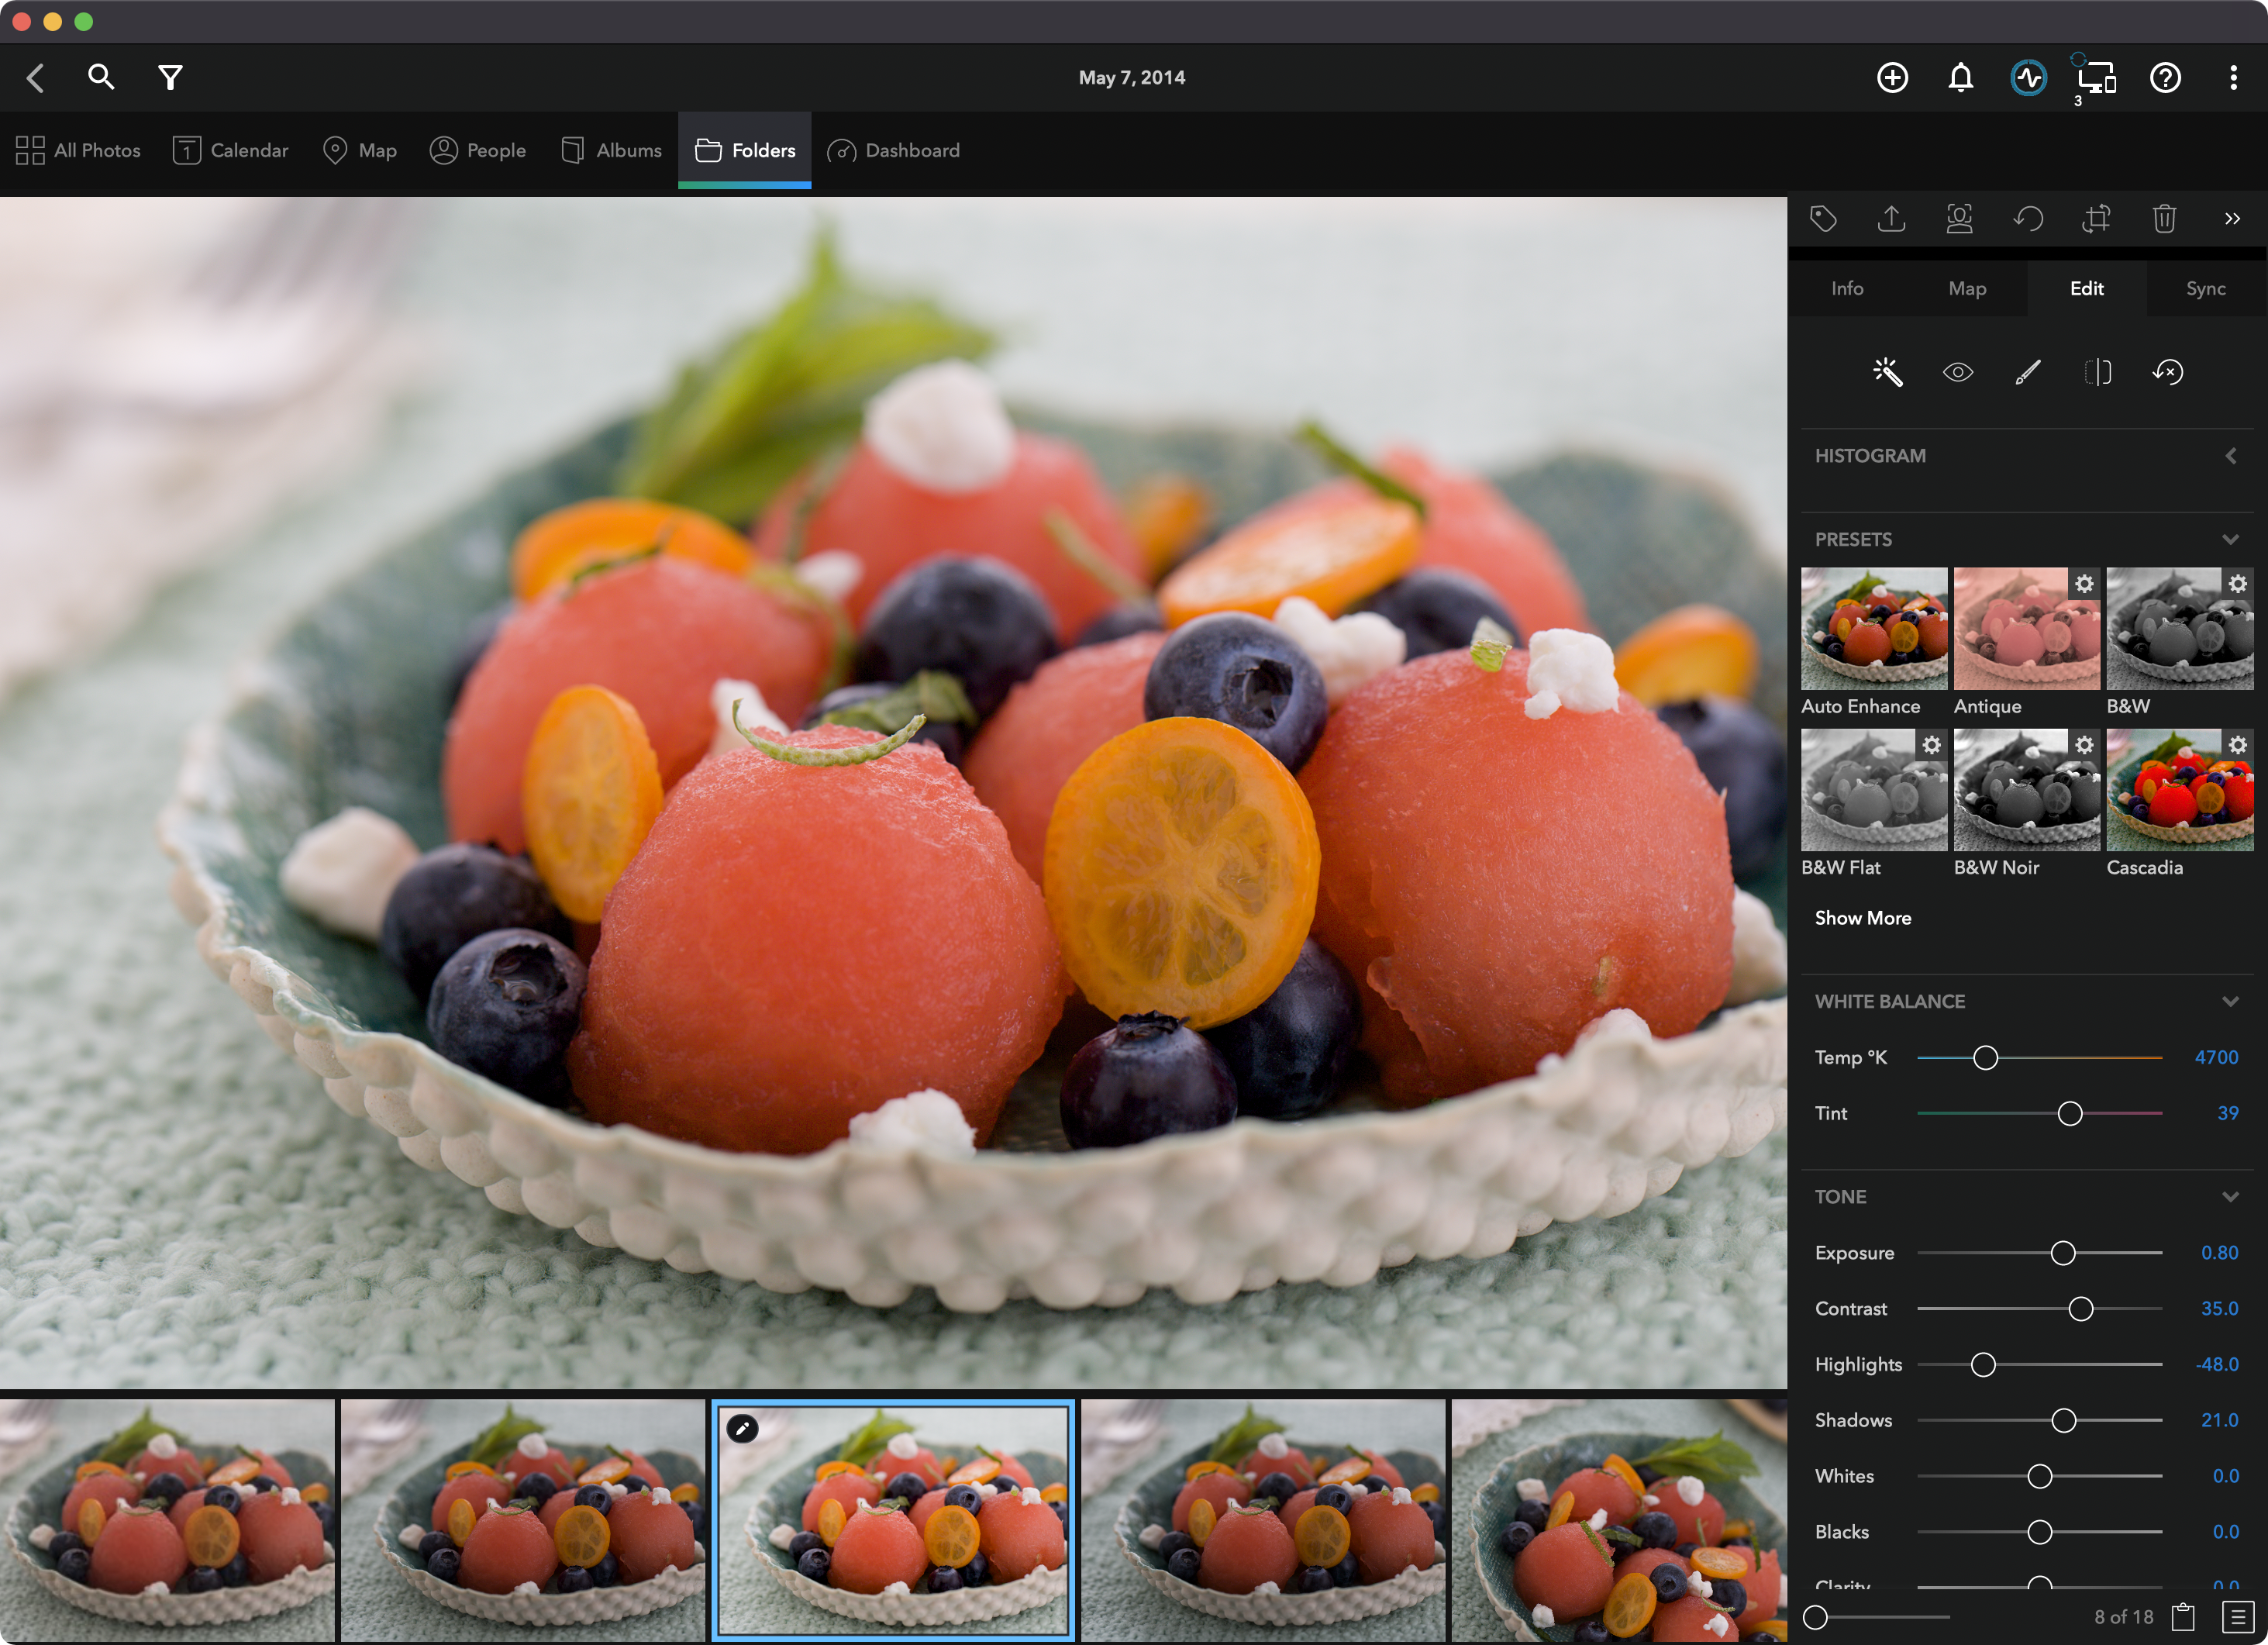 Mylio Photos has an editing panel on the right that allows you to make enhancements to your photos before exporting or sharing.